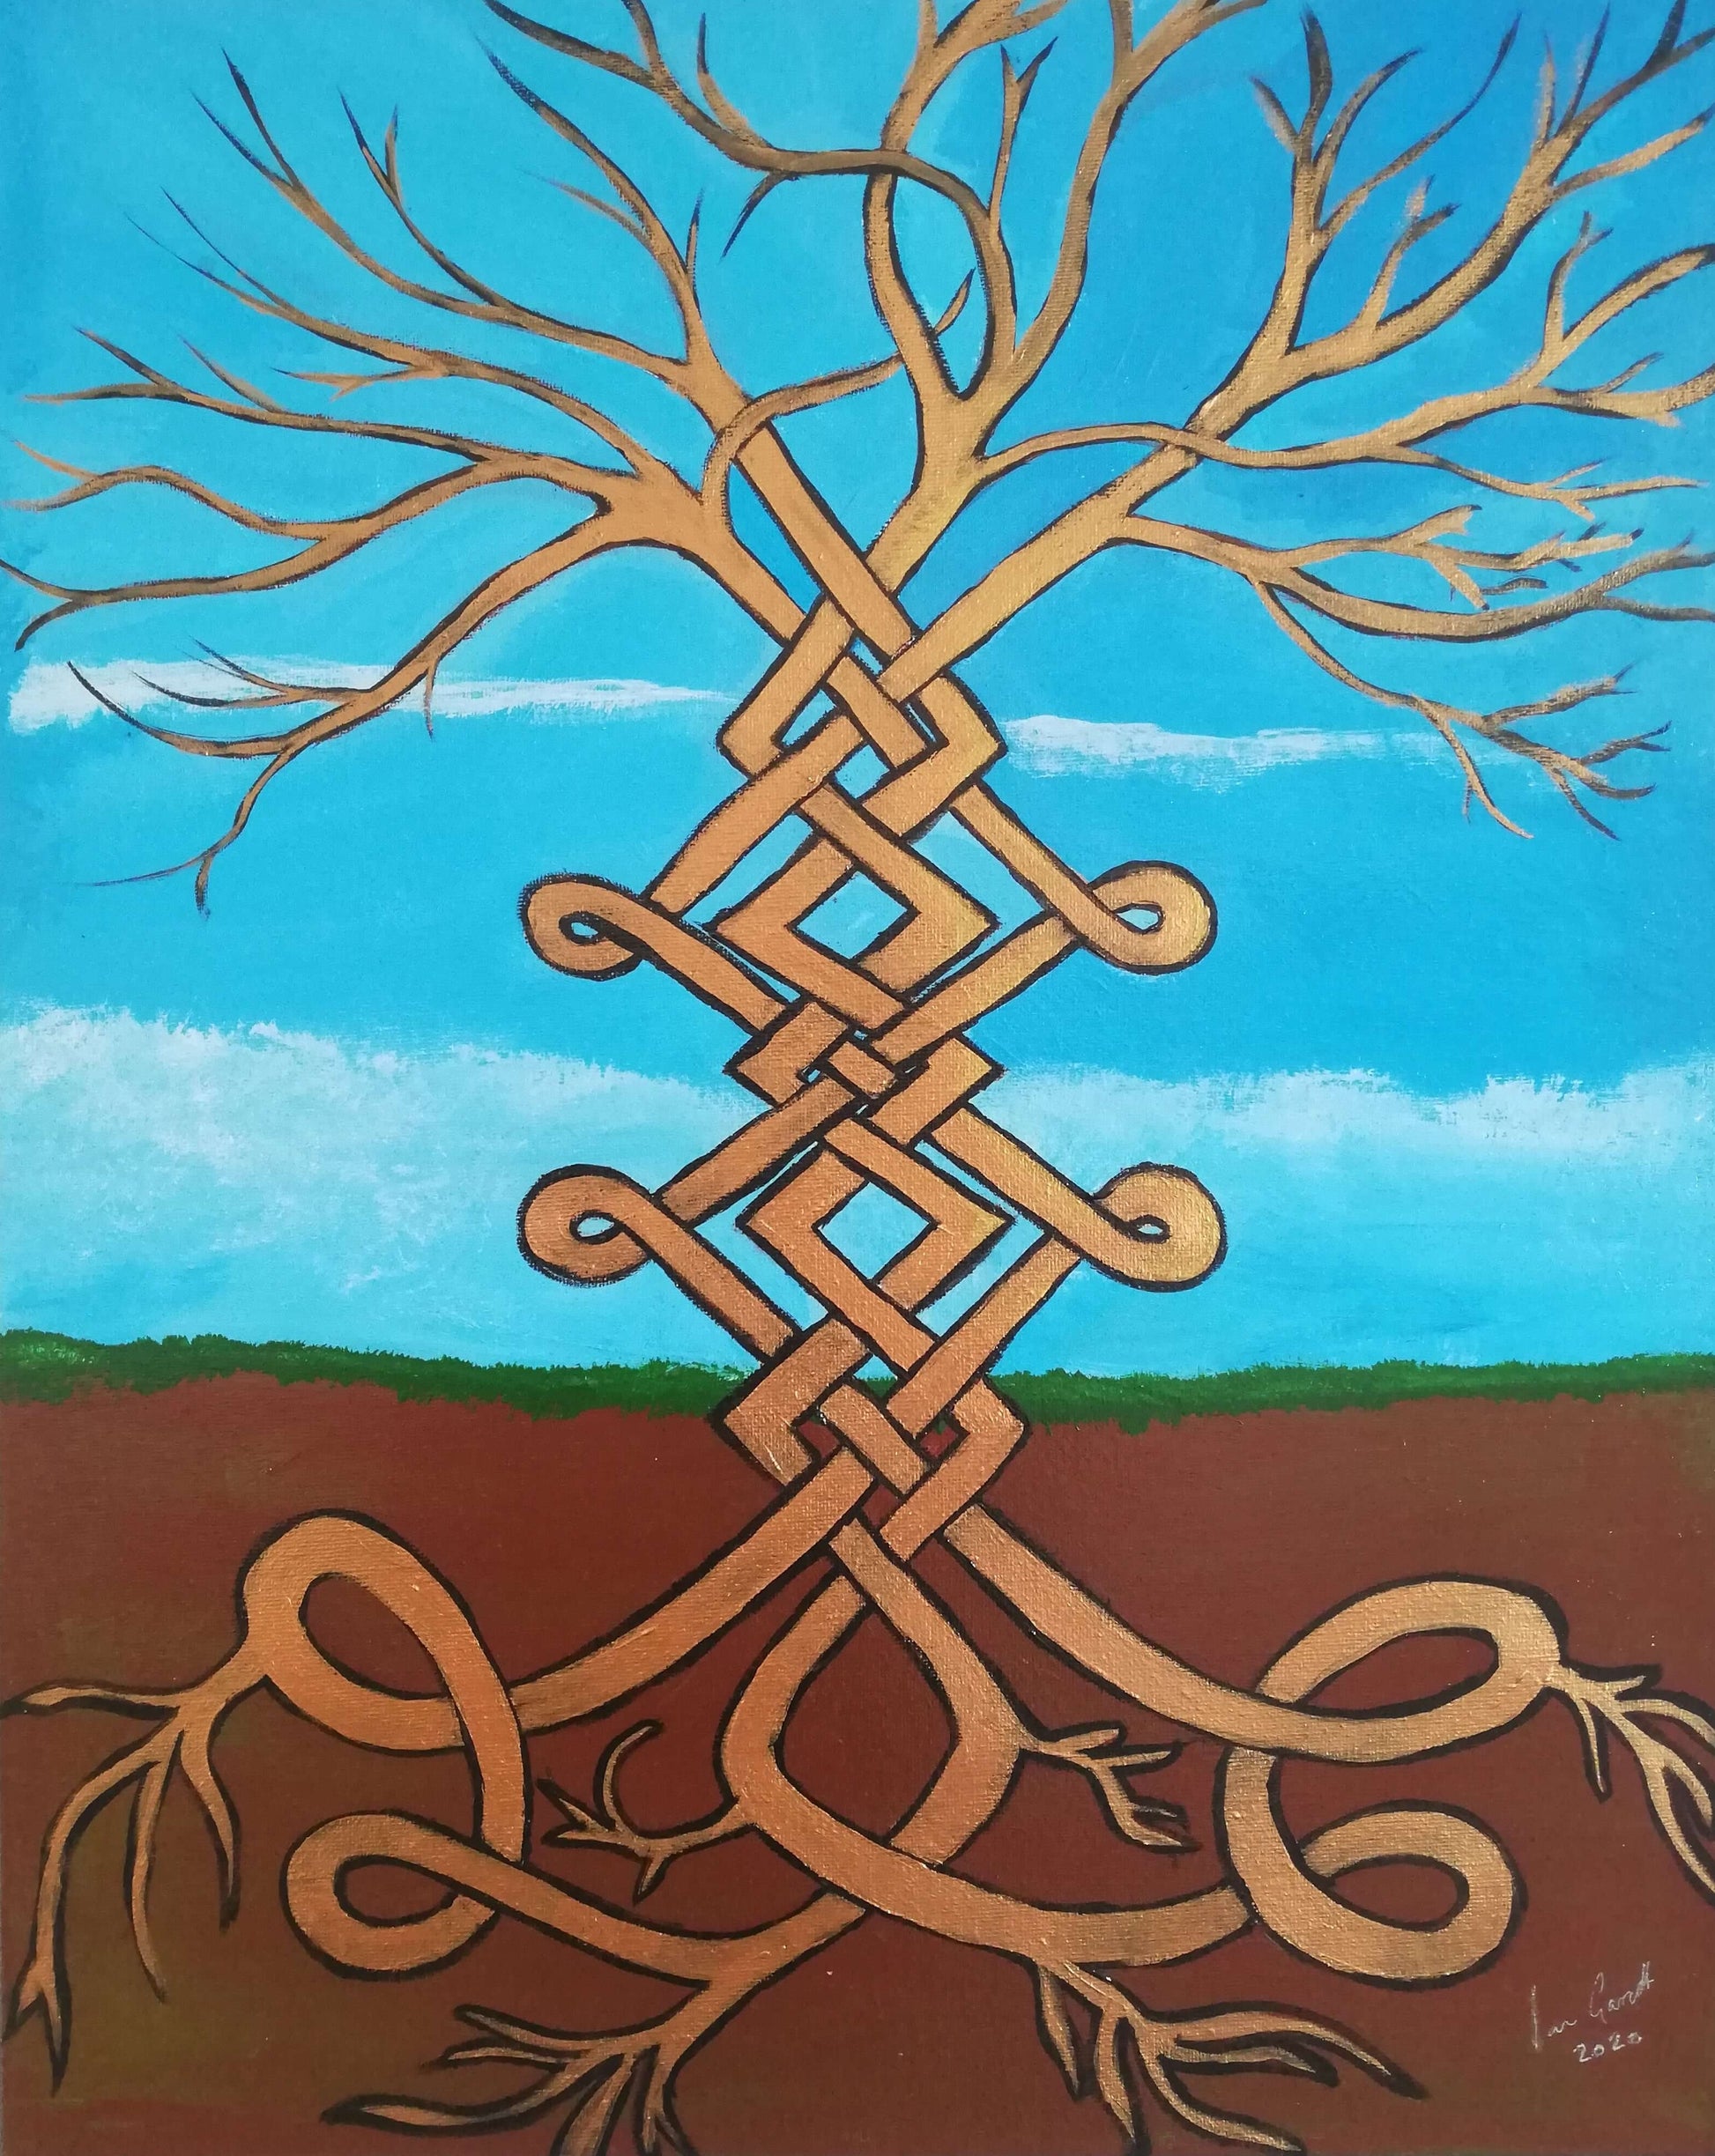 Twist and turns in the Tree of Life, ©Ian Garrett 2020. Acrylic on Canvas 20 x 16 inches.